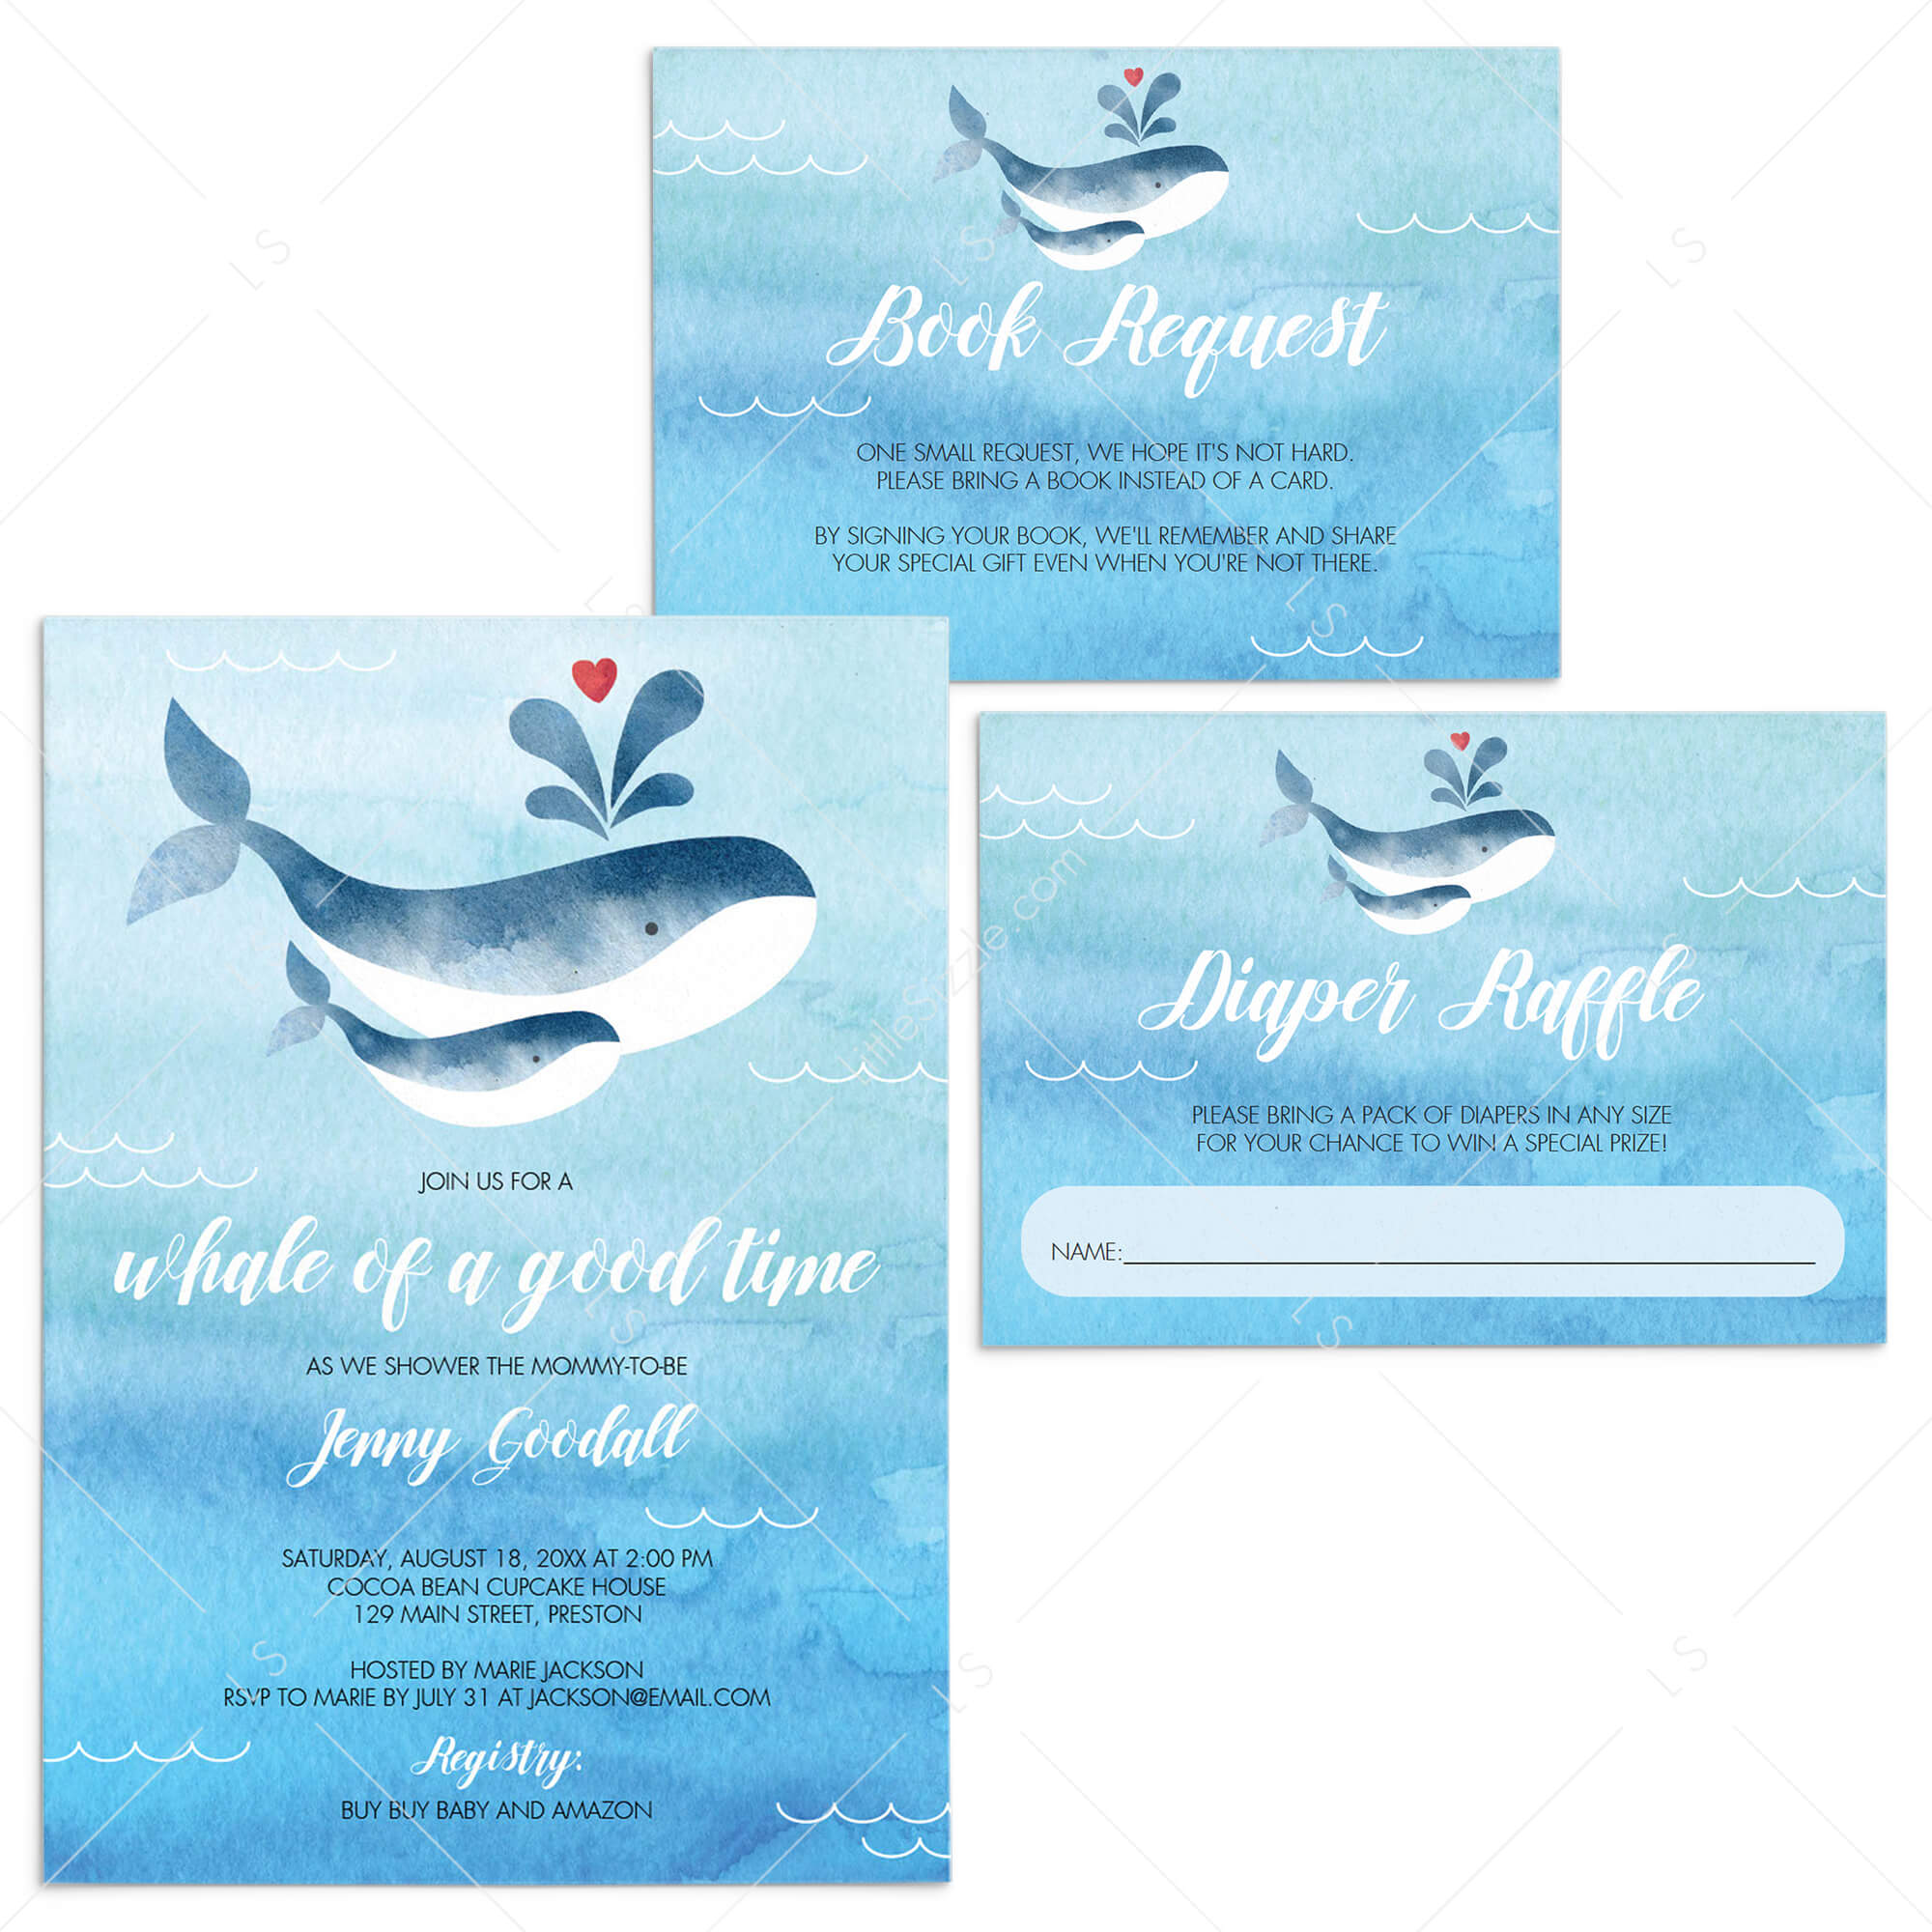 Whale invitation set for boy baby shower